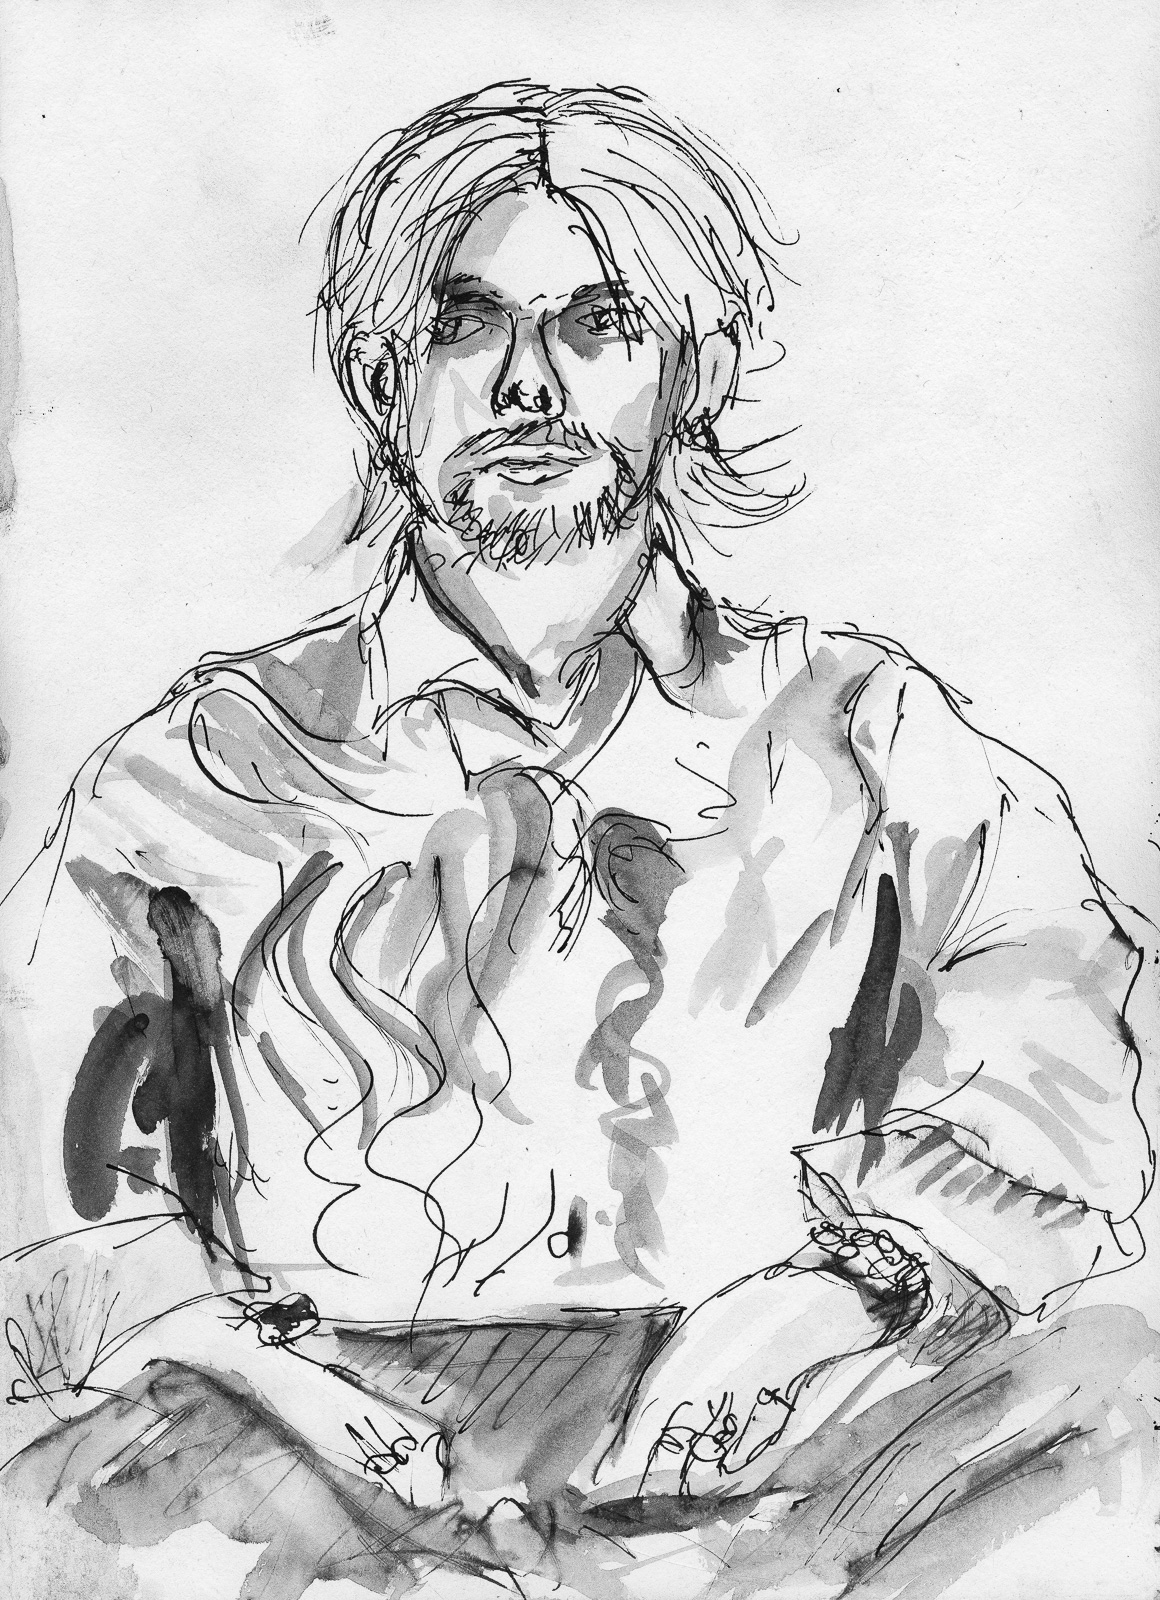 Mason, Portraits At The Pub, Fountain Pen and wash, A4 Flat White Sketchbook.